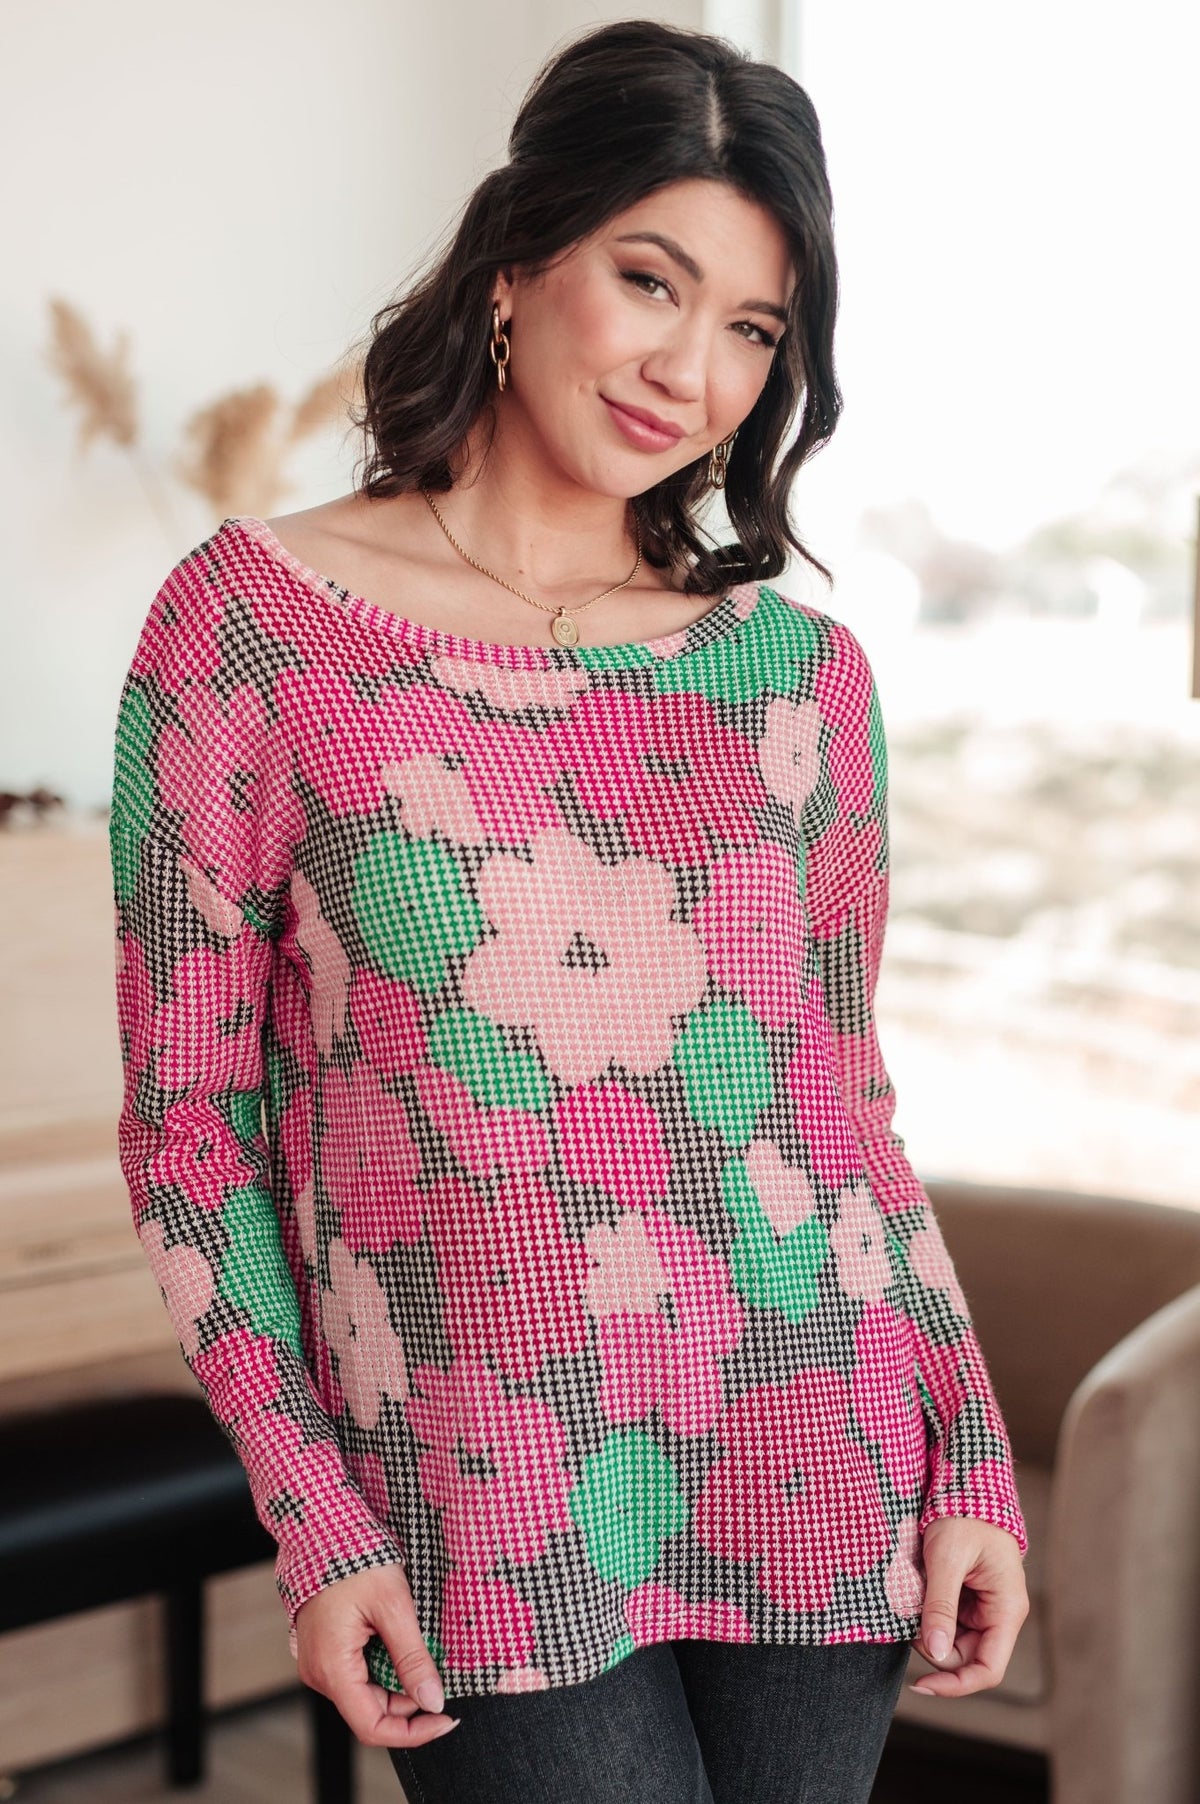 Group Chat Floral Top - Happily Ever Atchison Shop Co.